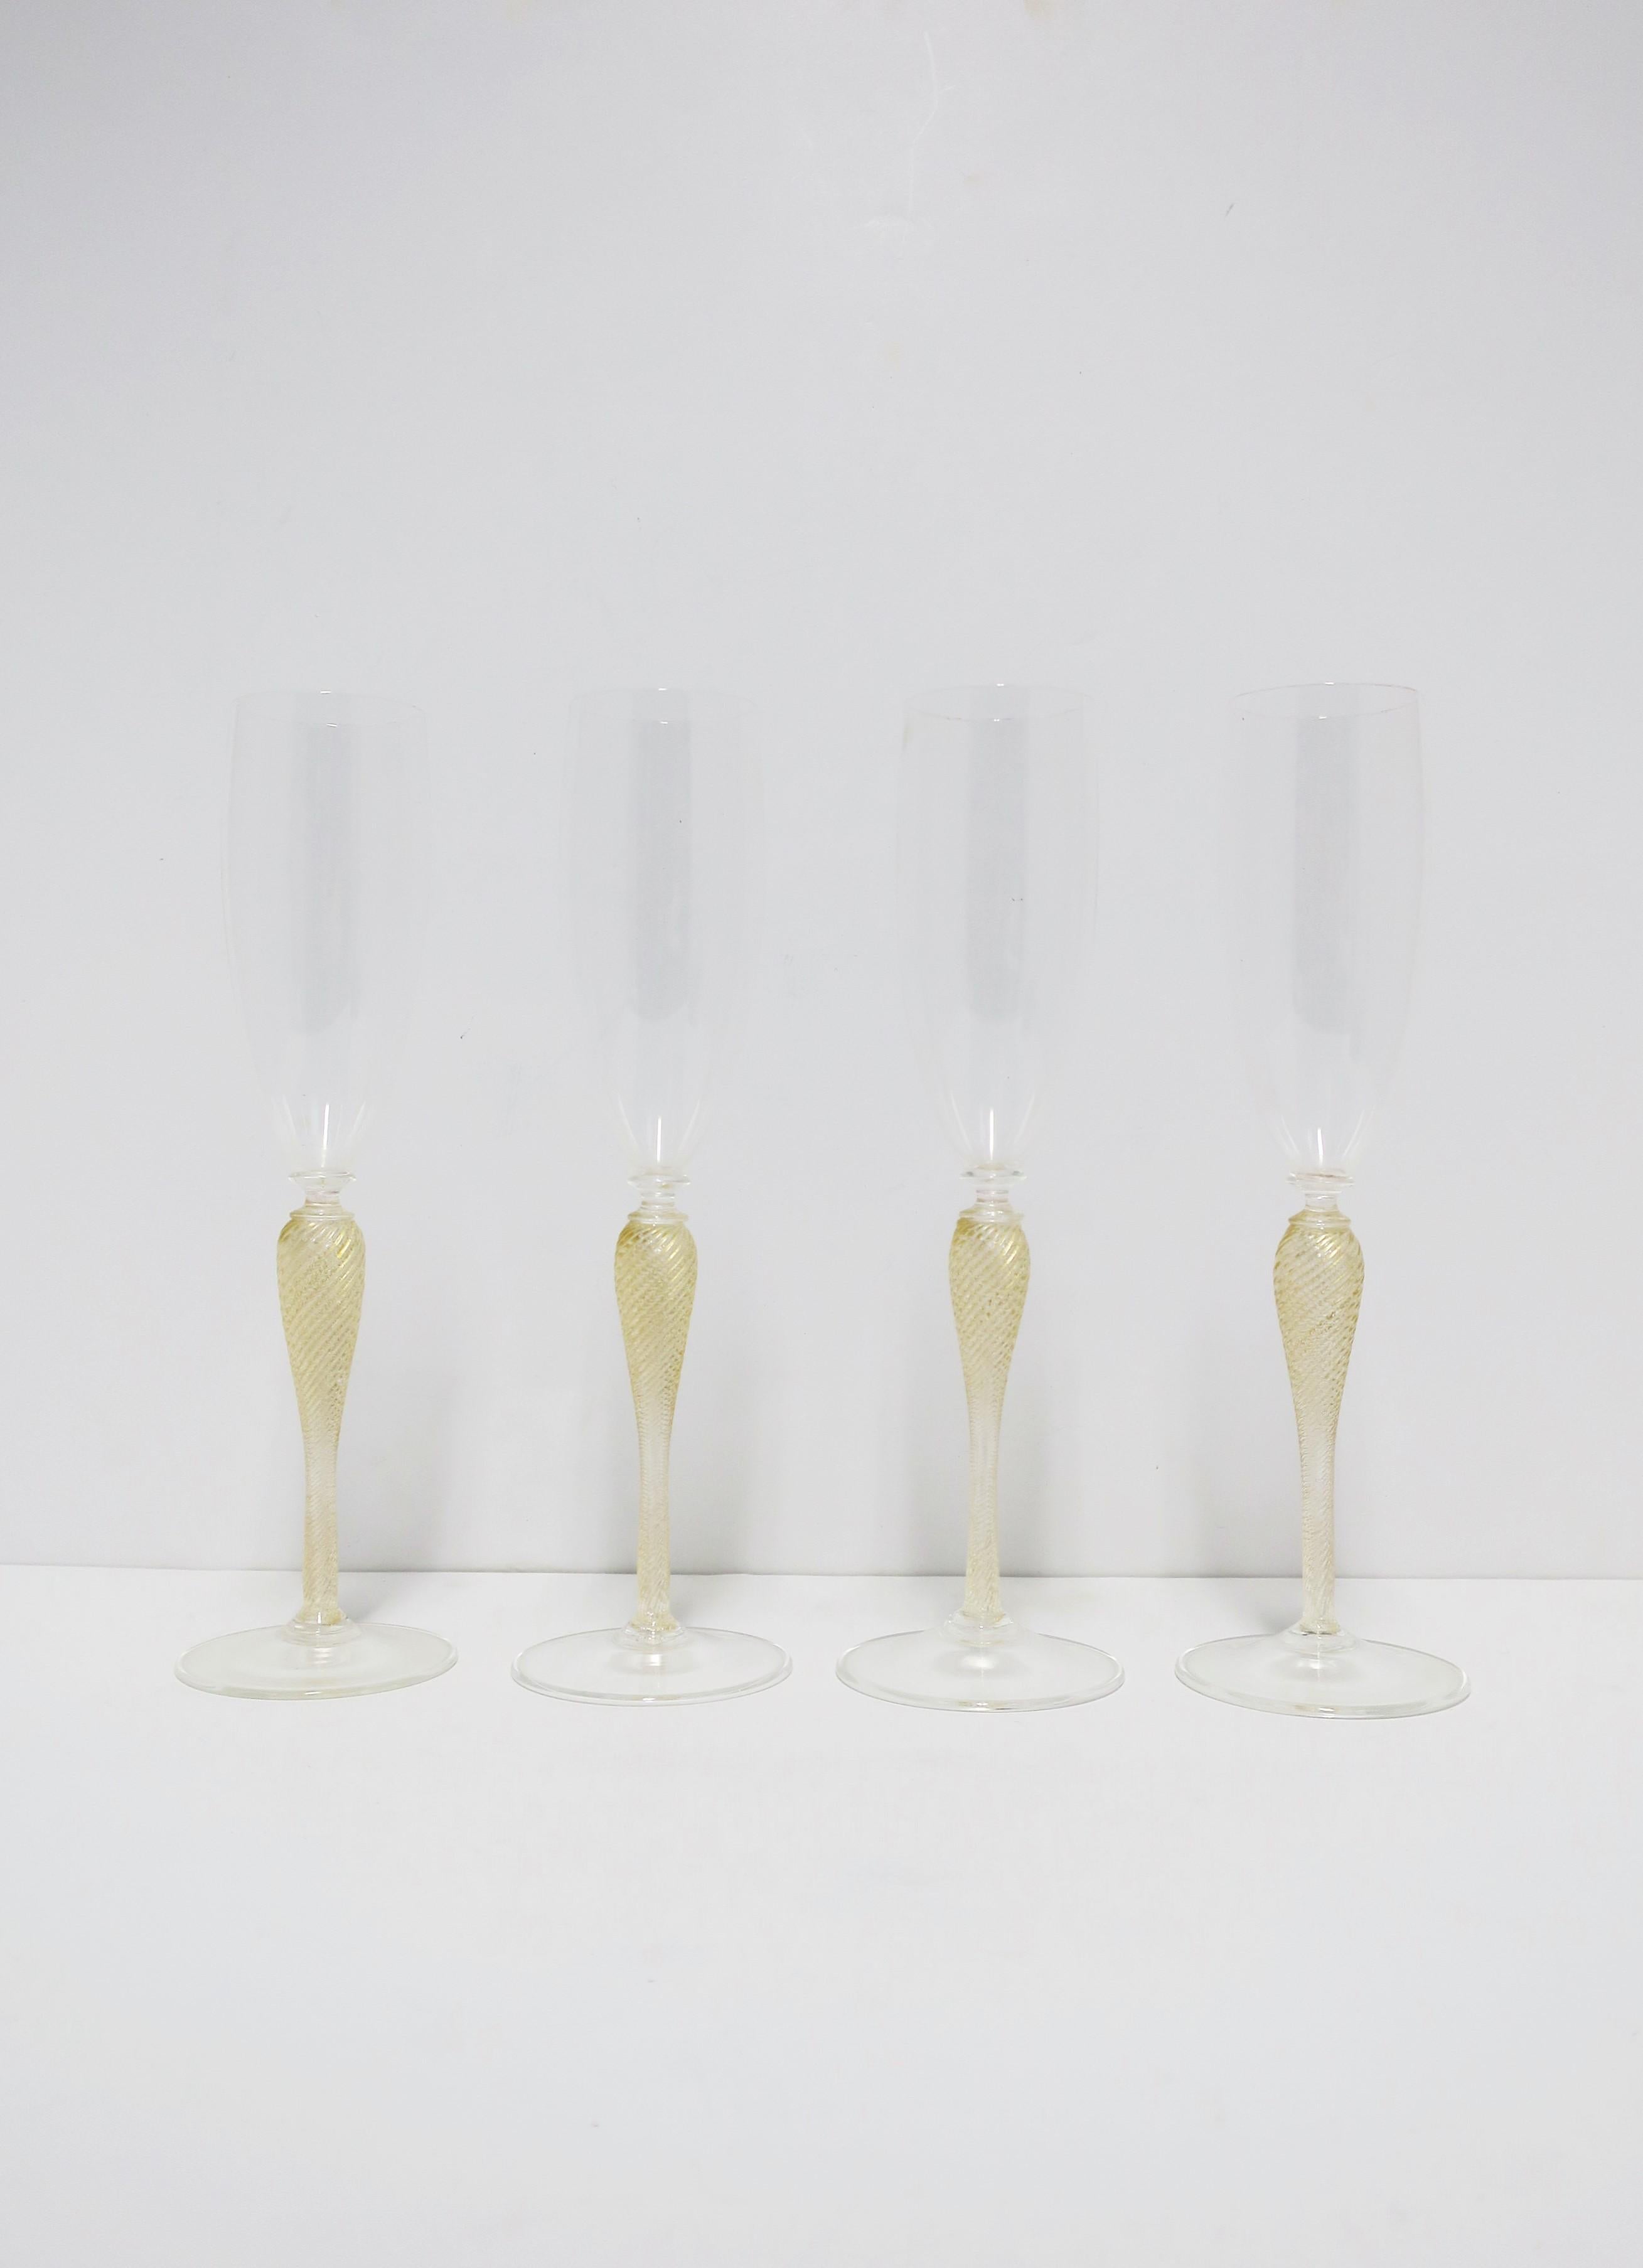 A beautiful set of four (4) Italian Venetian Murano gold and transparent art Champagne or cocktail flute glasses by Cenedese, circa late-20th century, Italy. Enjoy Champagne, Champagne cocktail, other cocktails, etc., with this beautiful set of